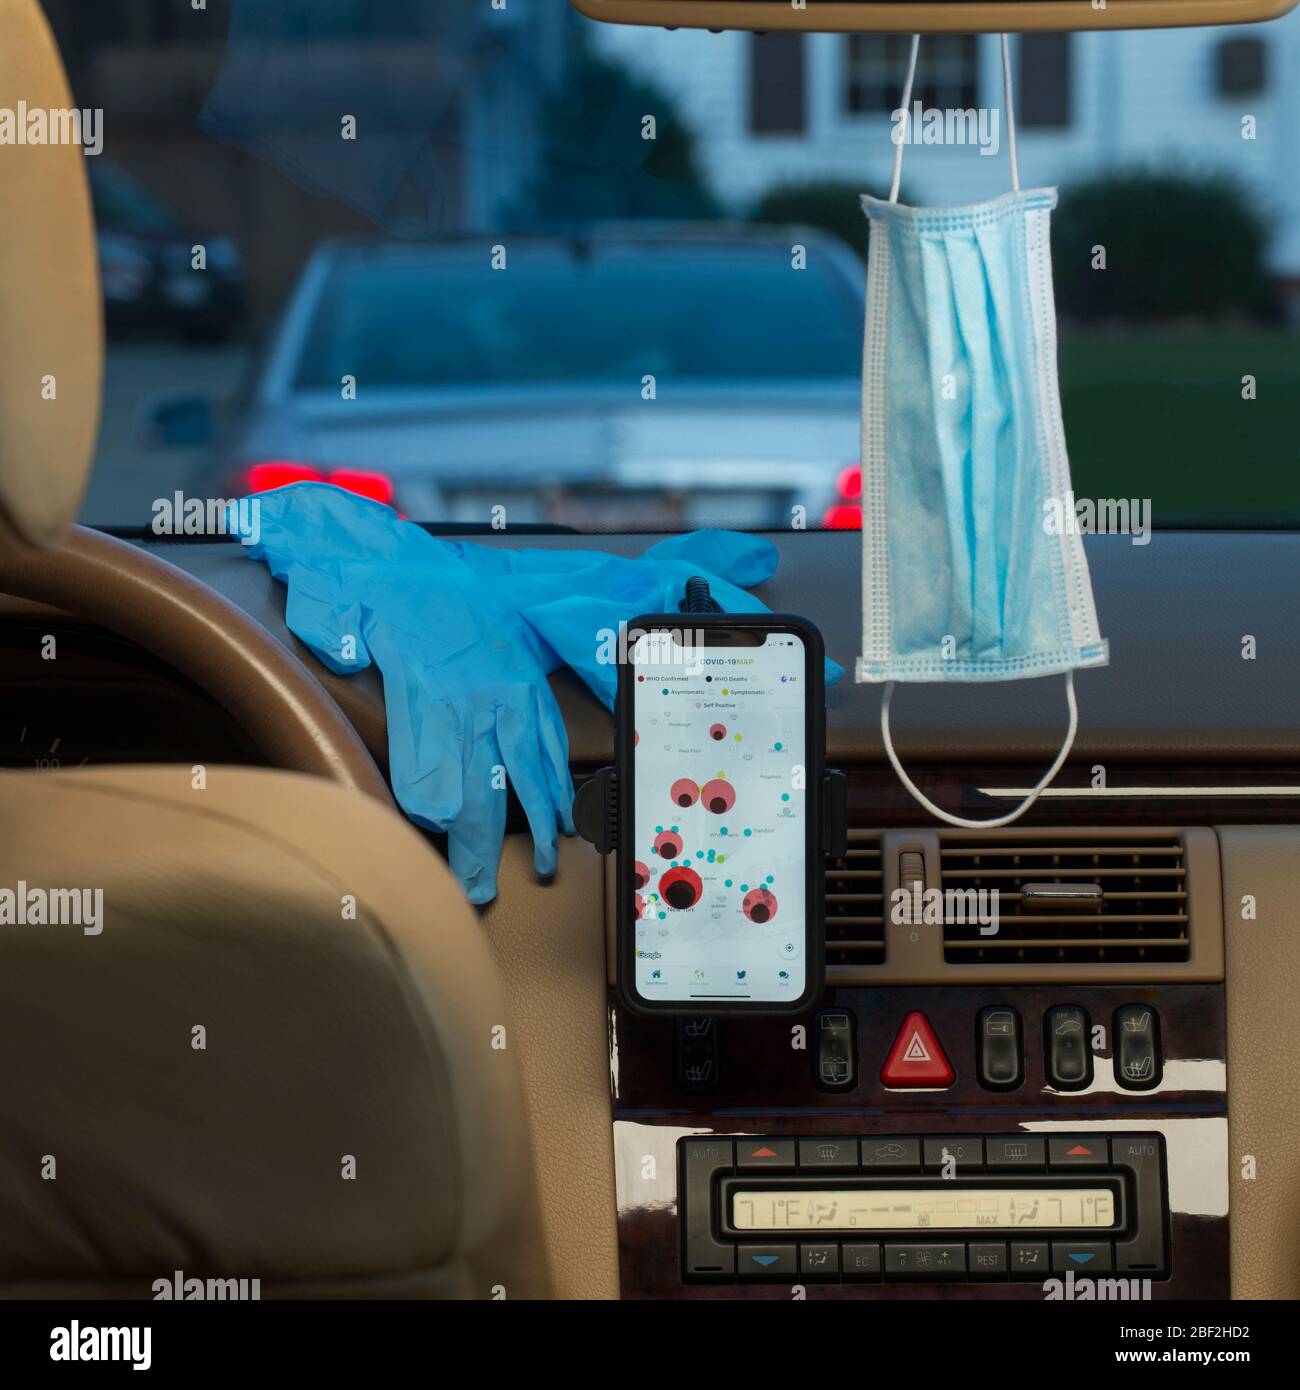 COVID-19: iPhone 11 displaying HealthLynked COVID-19 Tracker, face mask and latex gloves on the dashboard of a vehicle. Stock Photo